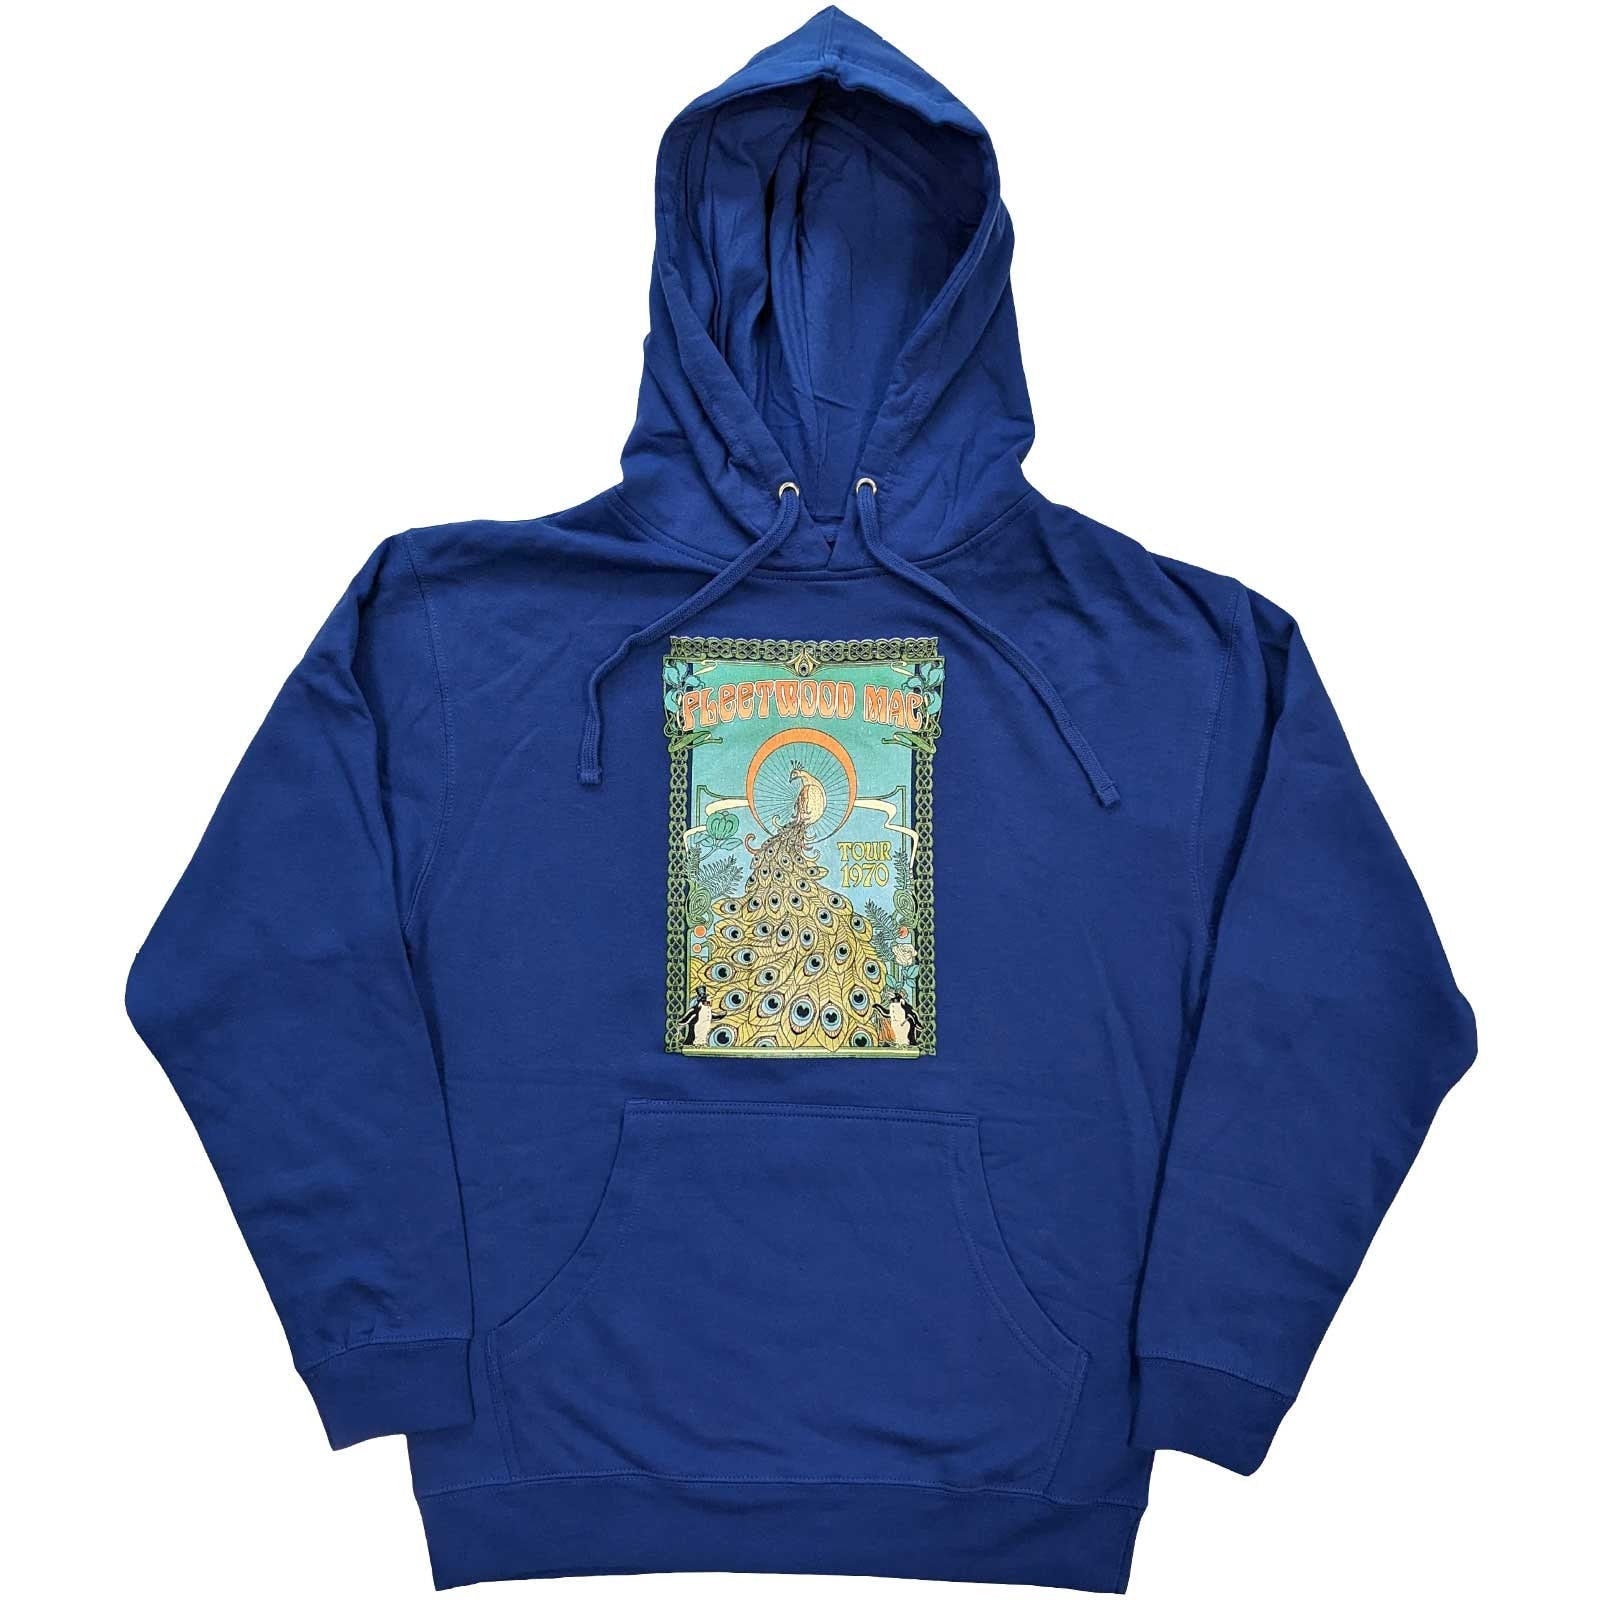 Fleetwood Mac Unisex Hoodie - Peacock - Official Licensed Design - Worldwide Shipping - Jelly Frog